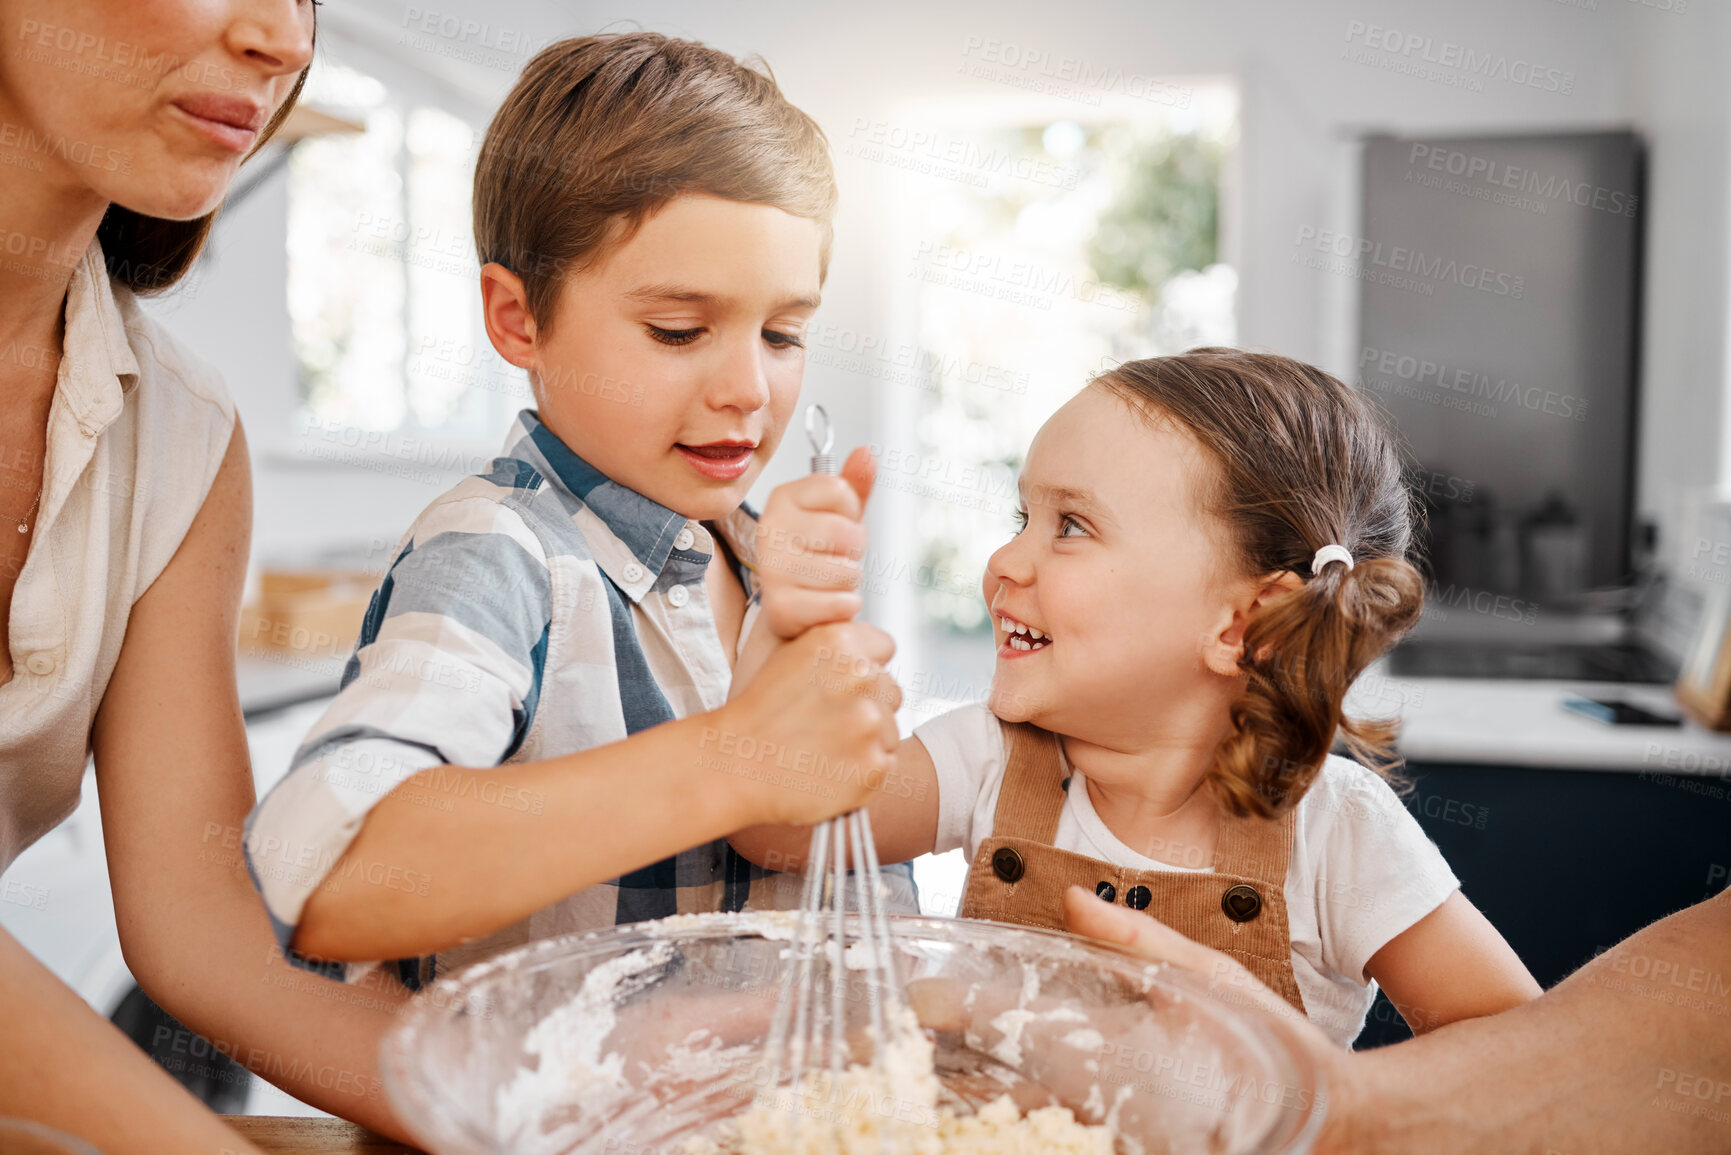 Buy stock photo Shot of two siblings baking together at home with the help of their mother